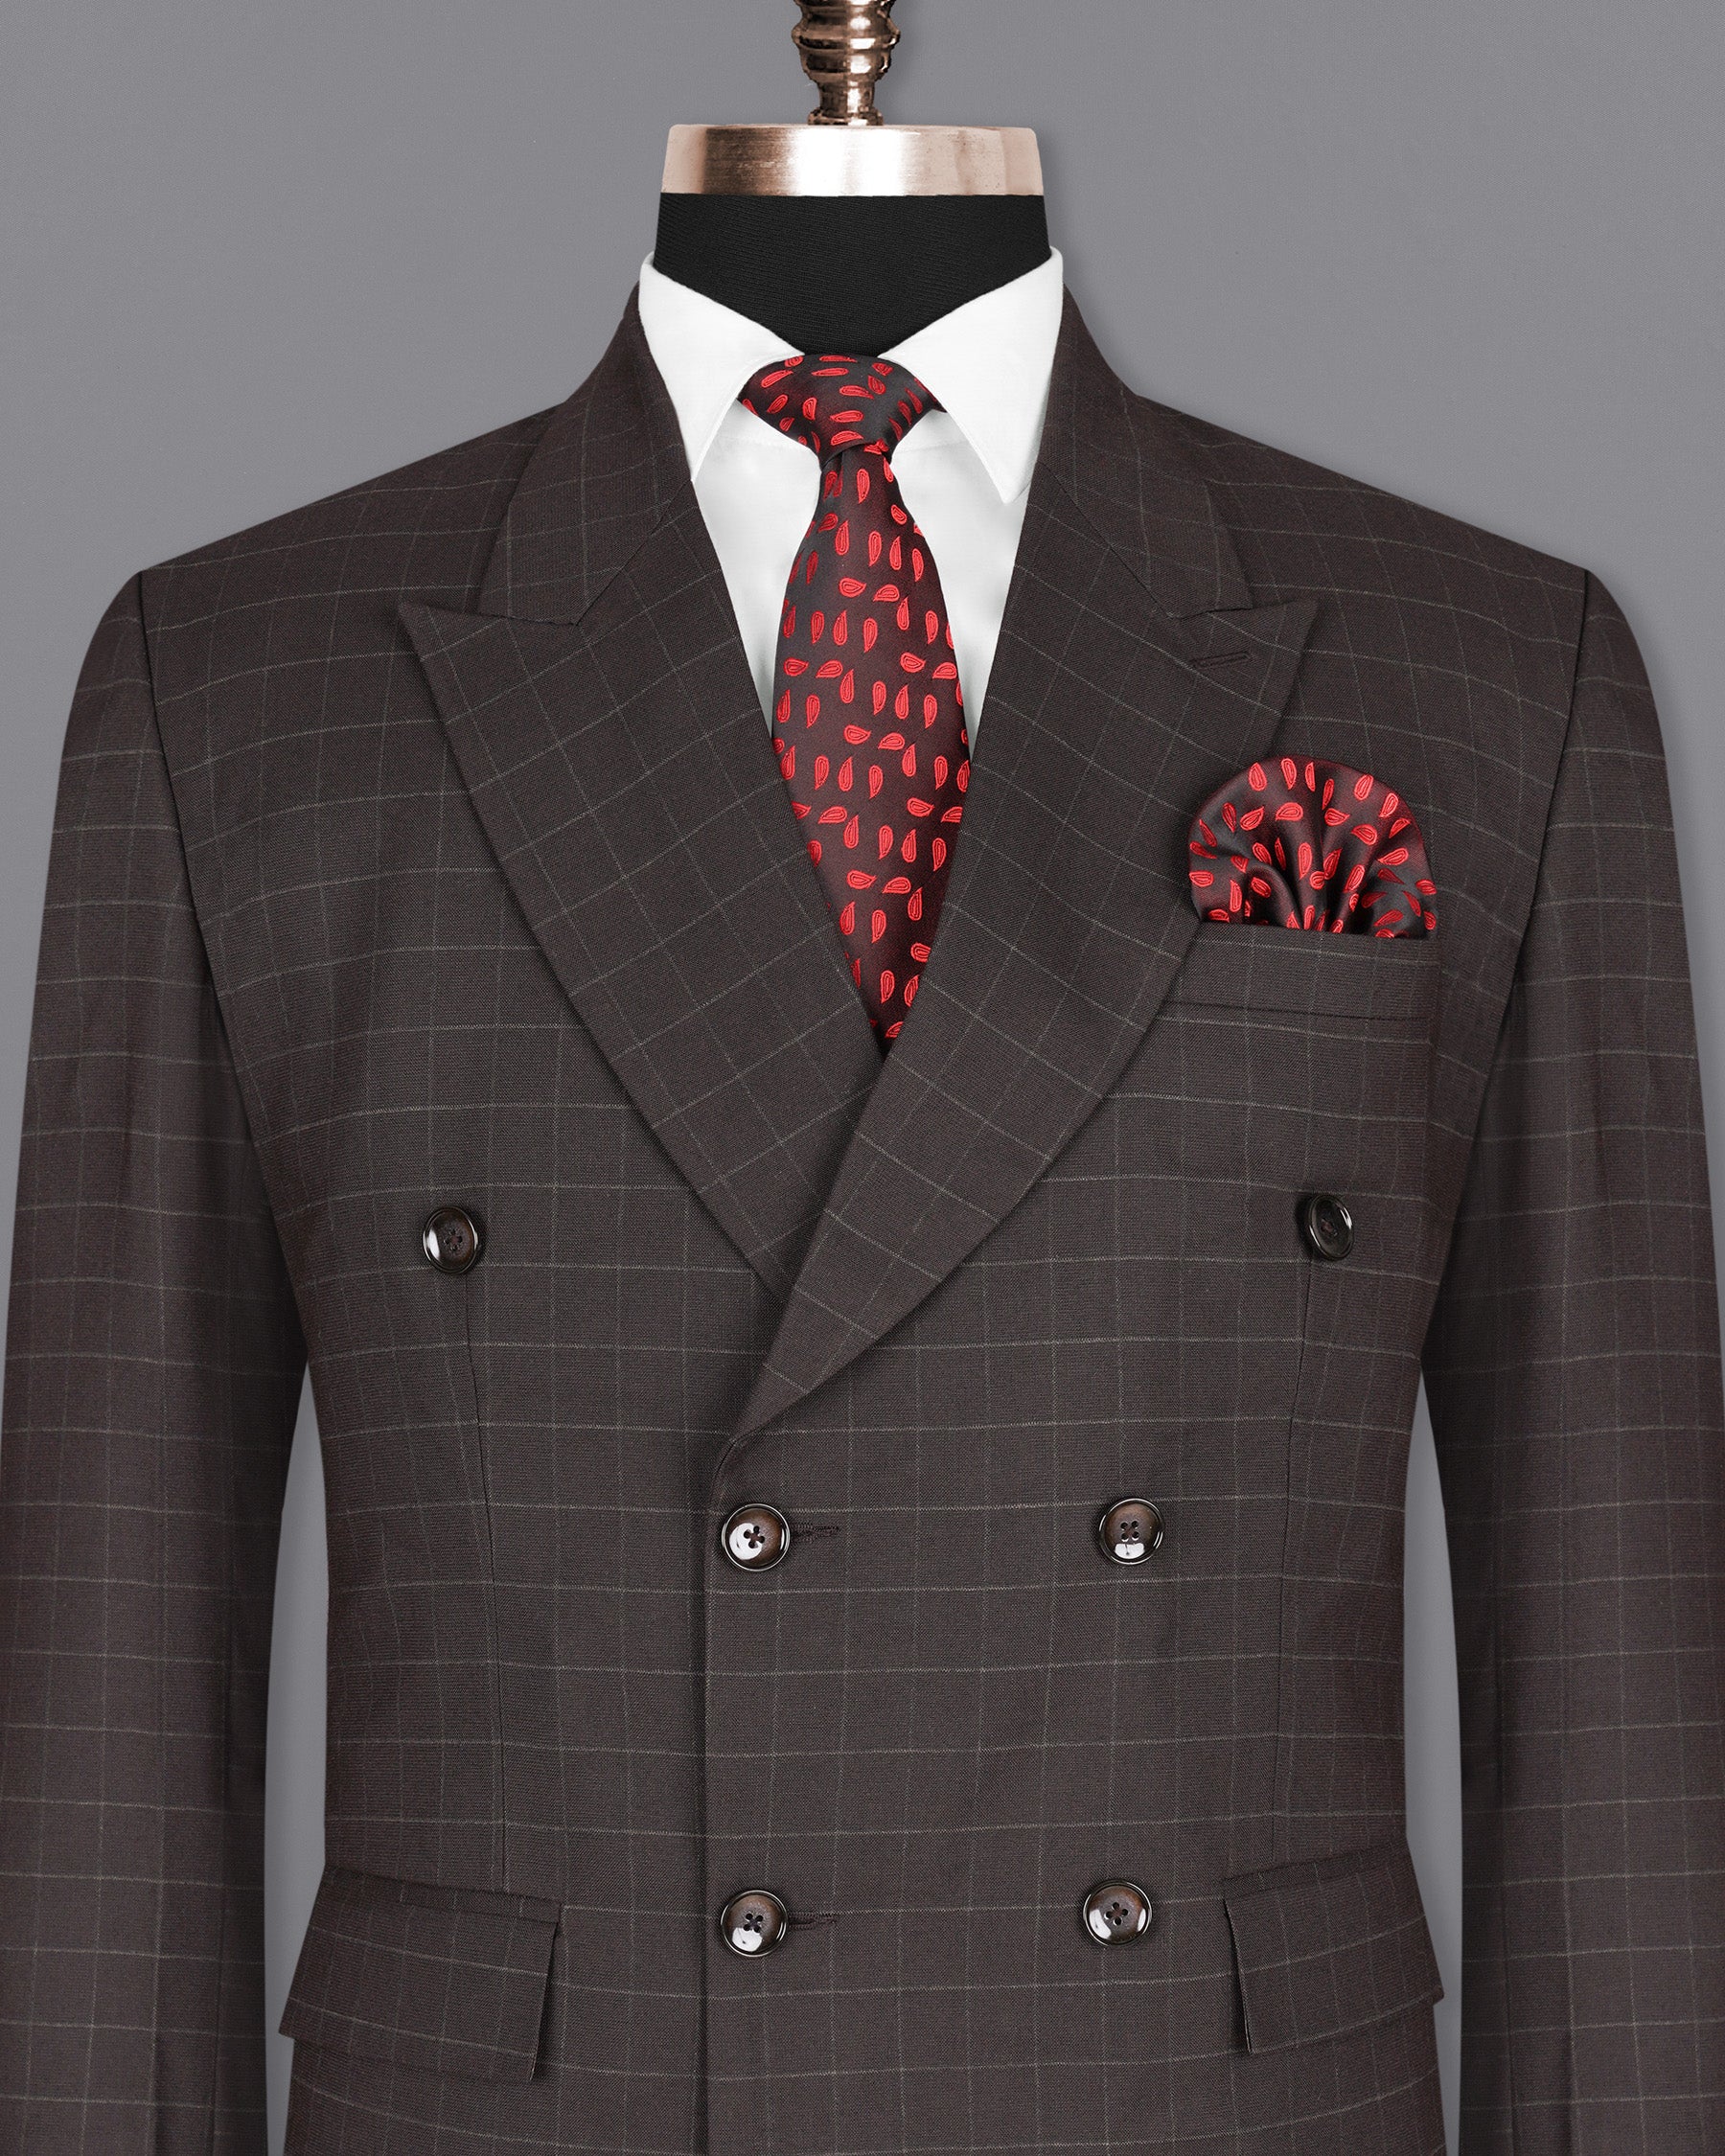 Thunder Brown windowpane Double Breasted Blazer BL1935-DB-36,BL1935-DB-38,BL1935-DB-40,BL1935-DB-42,BL1935-DB-44,BL1935-DB-46,BL1935-DB-48,BL1935-DB-50,BL1935-DB-52,BL1935-DB-54,BL1935-DB-56,BL1935-DB-58,BL1935-DB-60